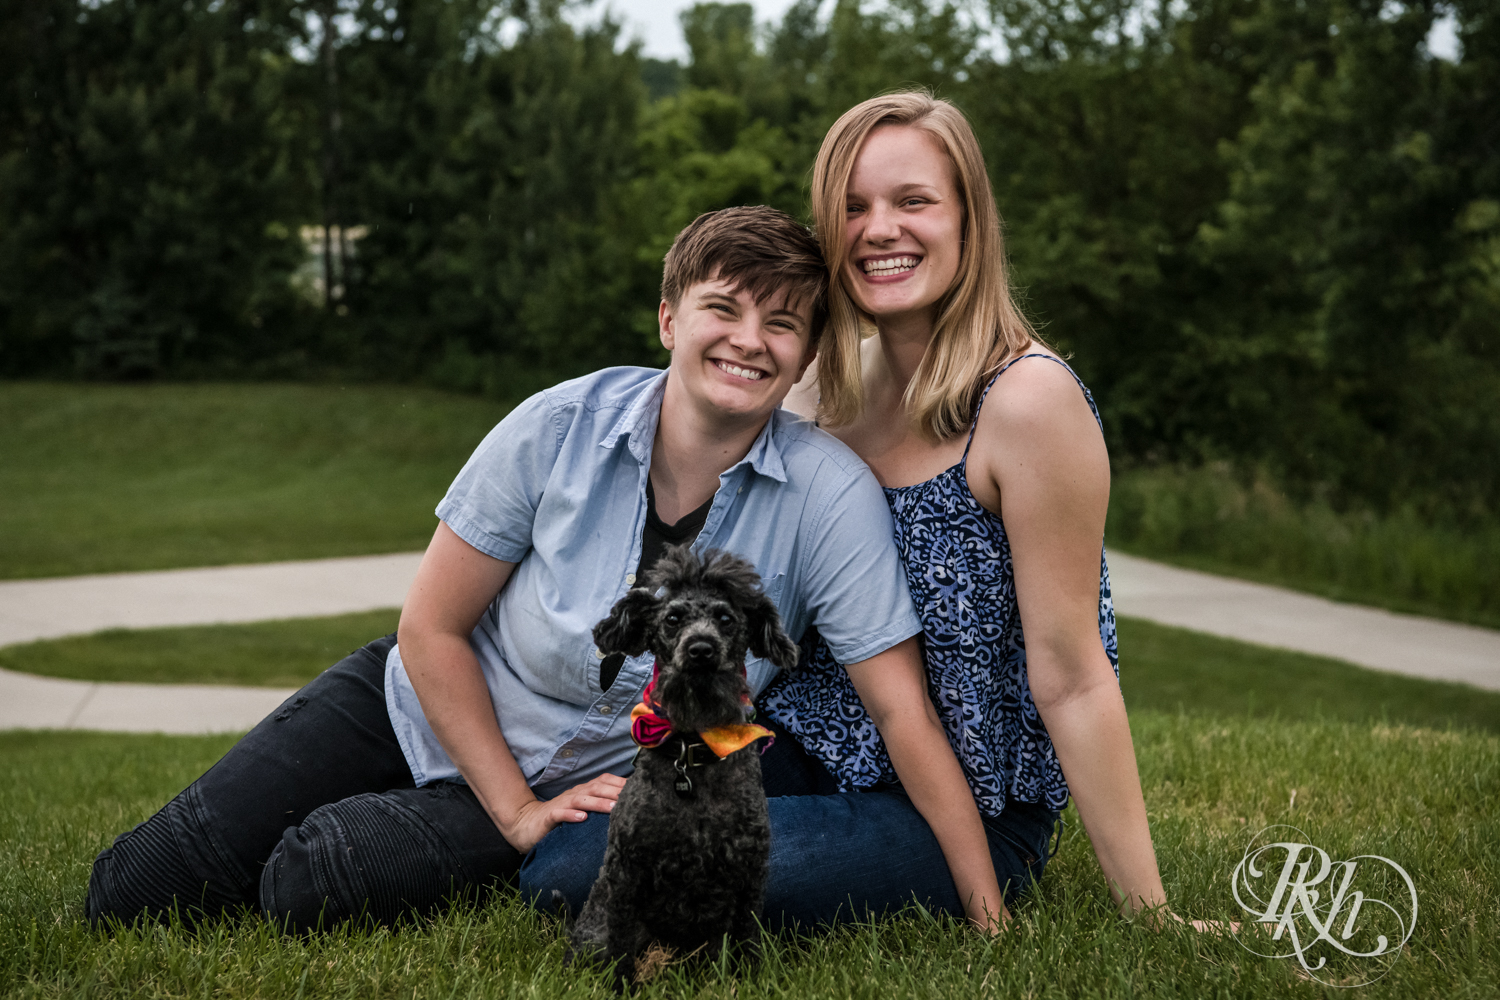 Lesbian couple smiles in the rain with their Doodle at Lebanon Hills Regional Park in Eagan, Minnesota.